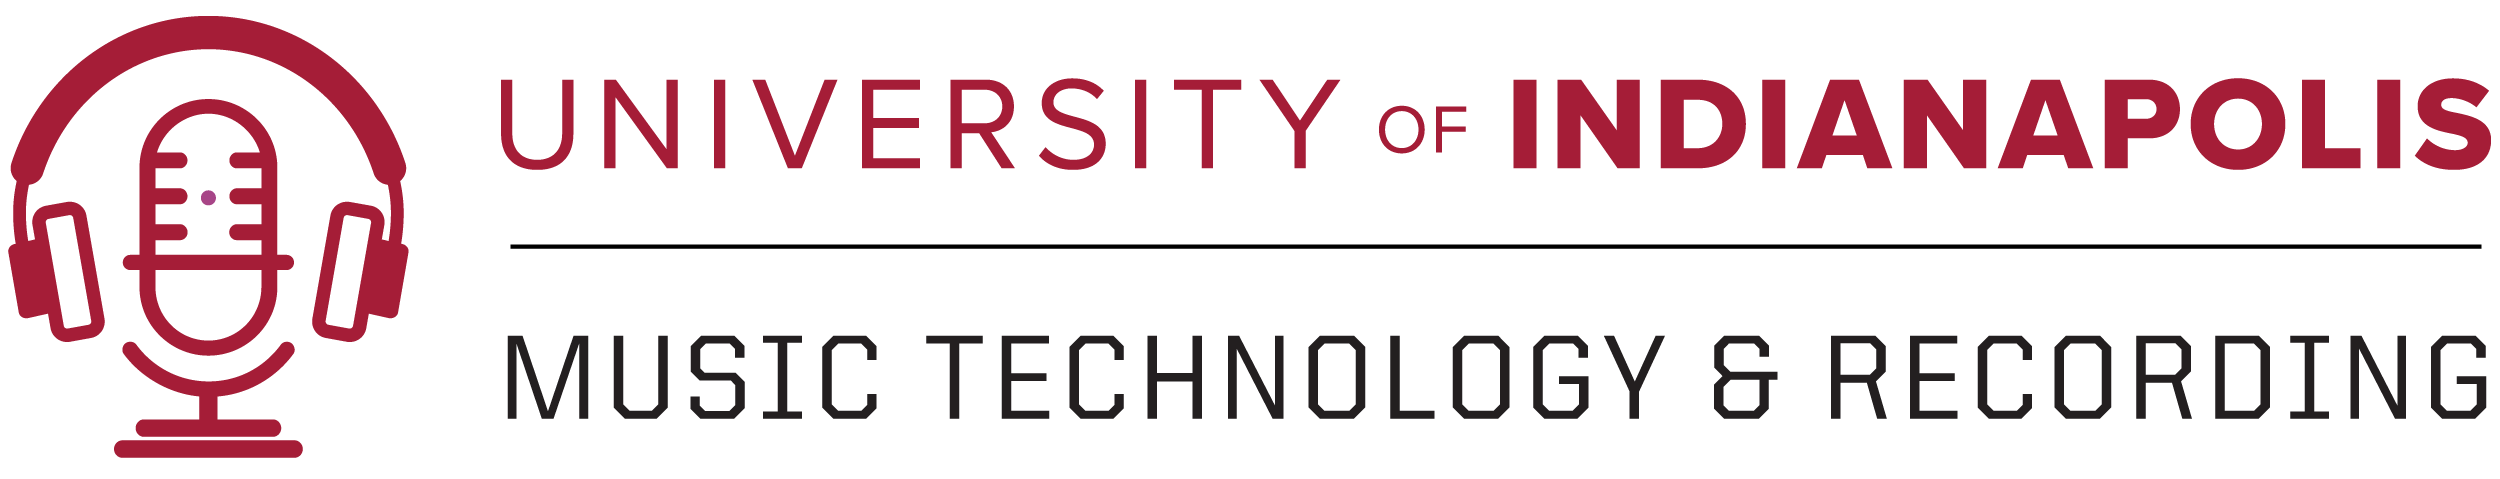 uindy_music_technology_recording_logo_2color-01